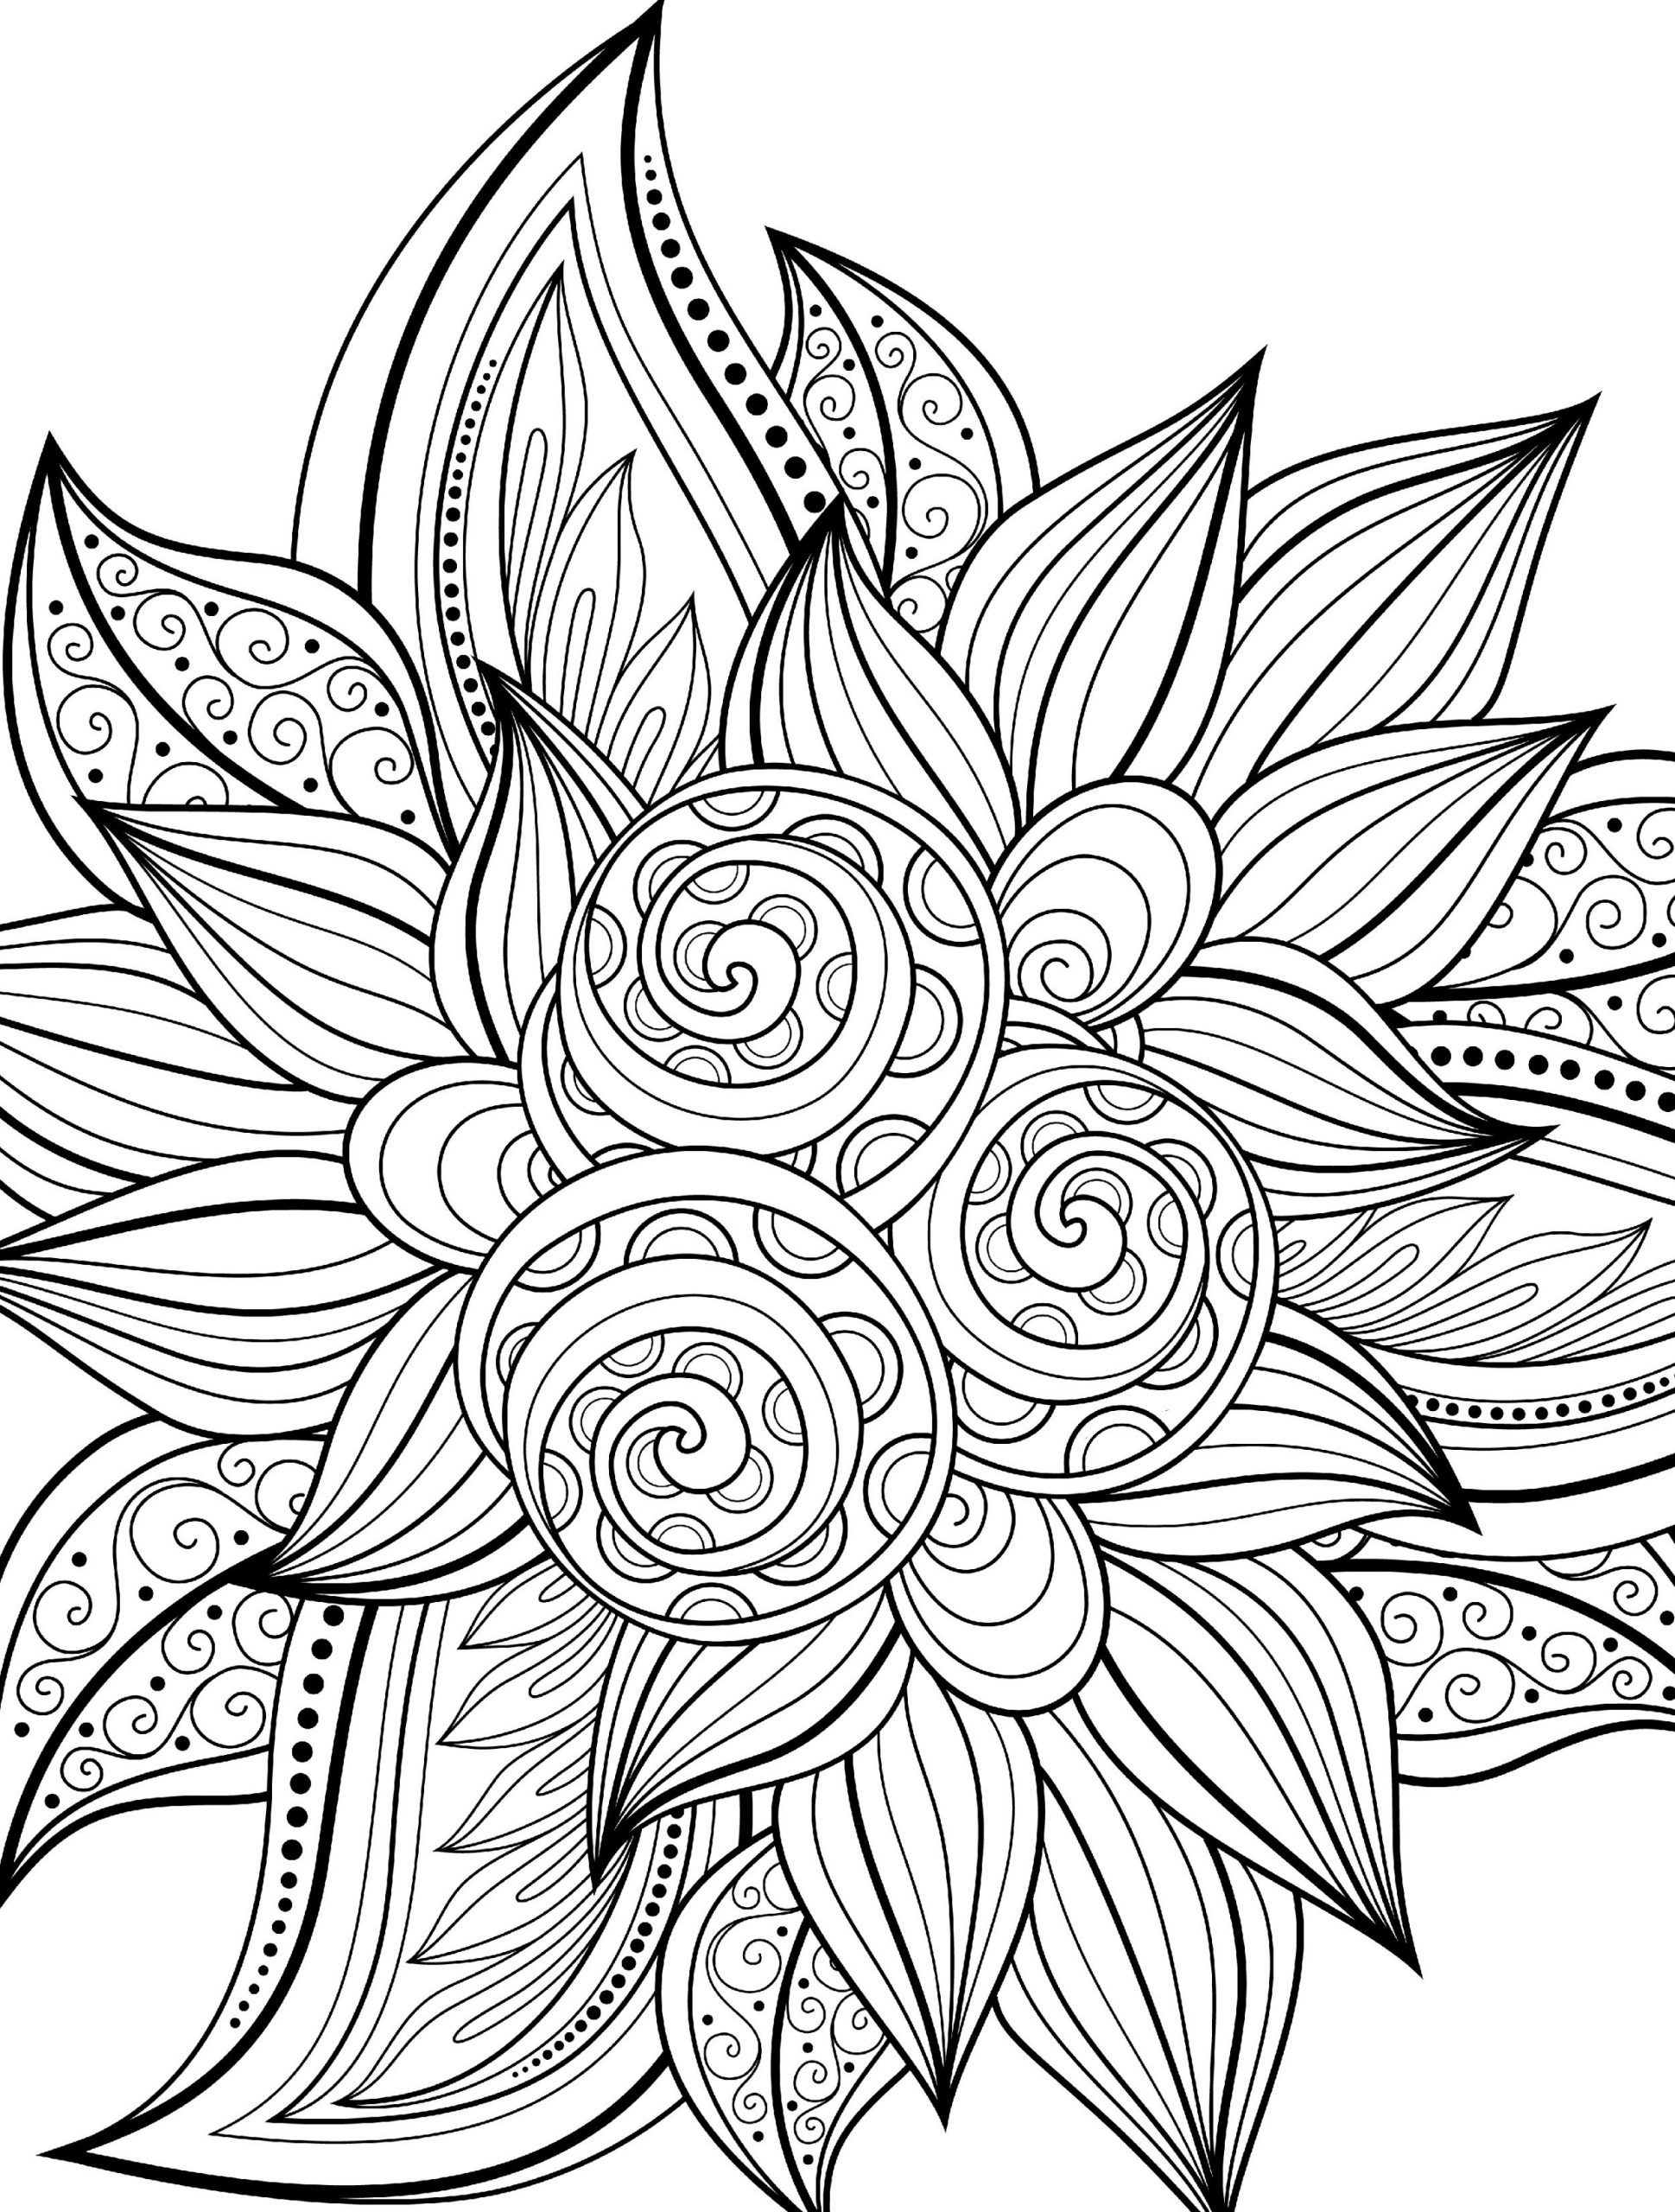 Printable Coloring Sheets for Adults